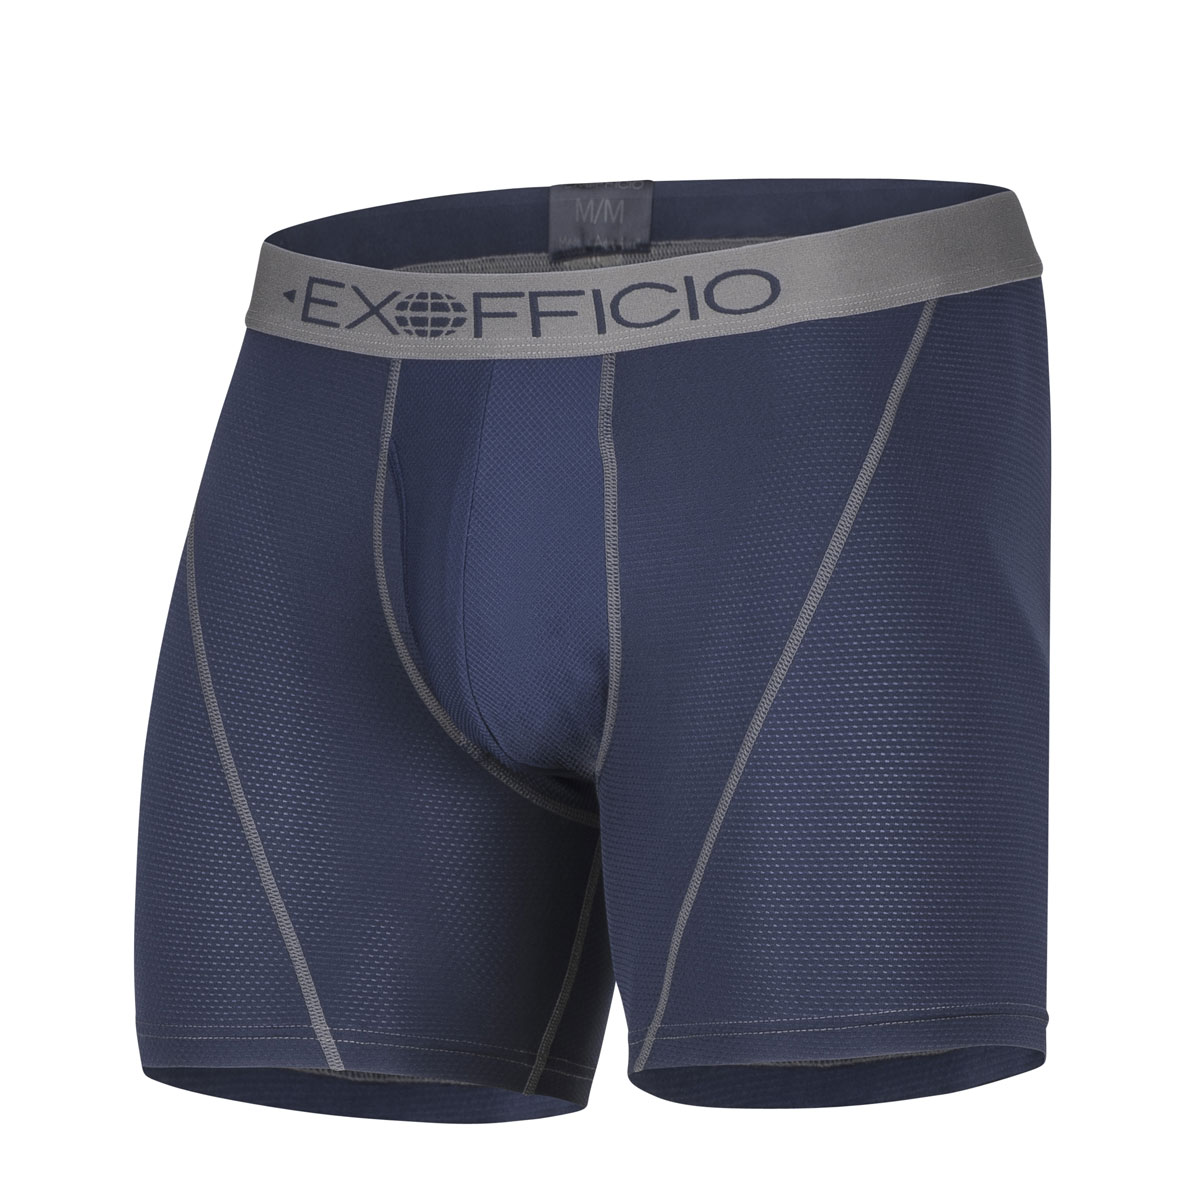 Give-N-Go Sport Mesh 6 Inch Inseam Boxer Briefs - Men's from